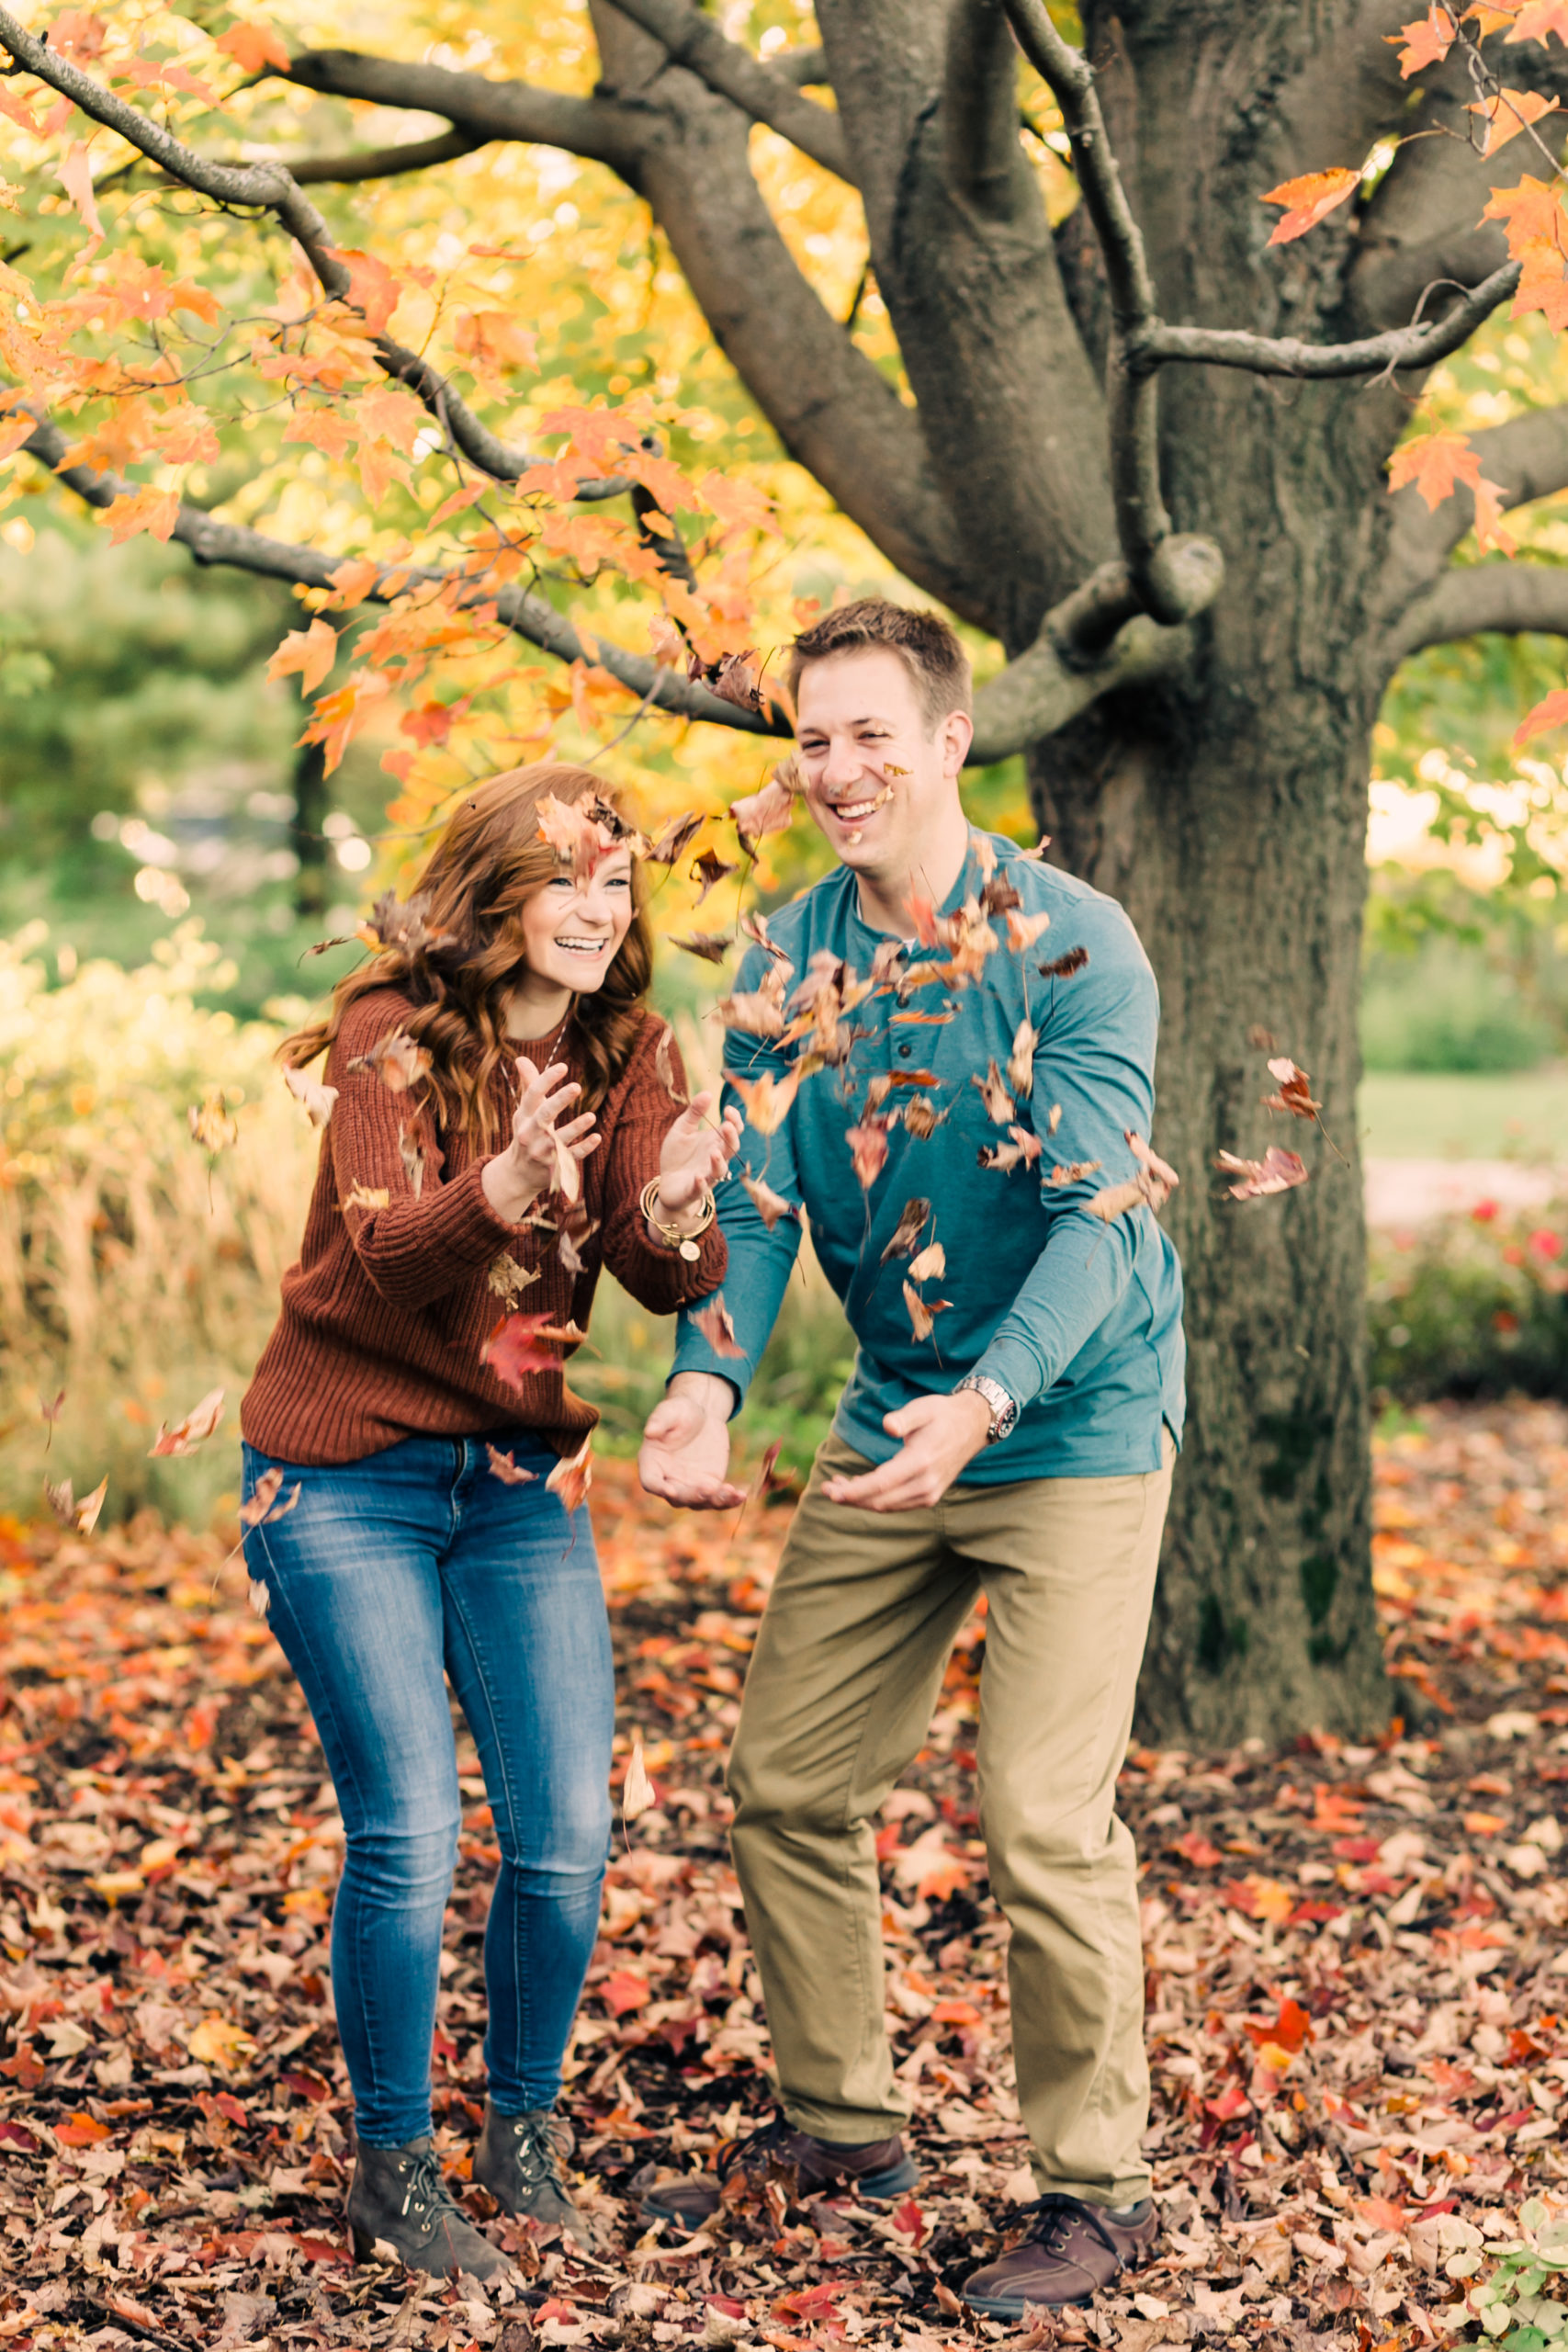 Fall Engagement Photos | Diana and Joey - janetdphotography.com